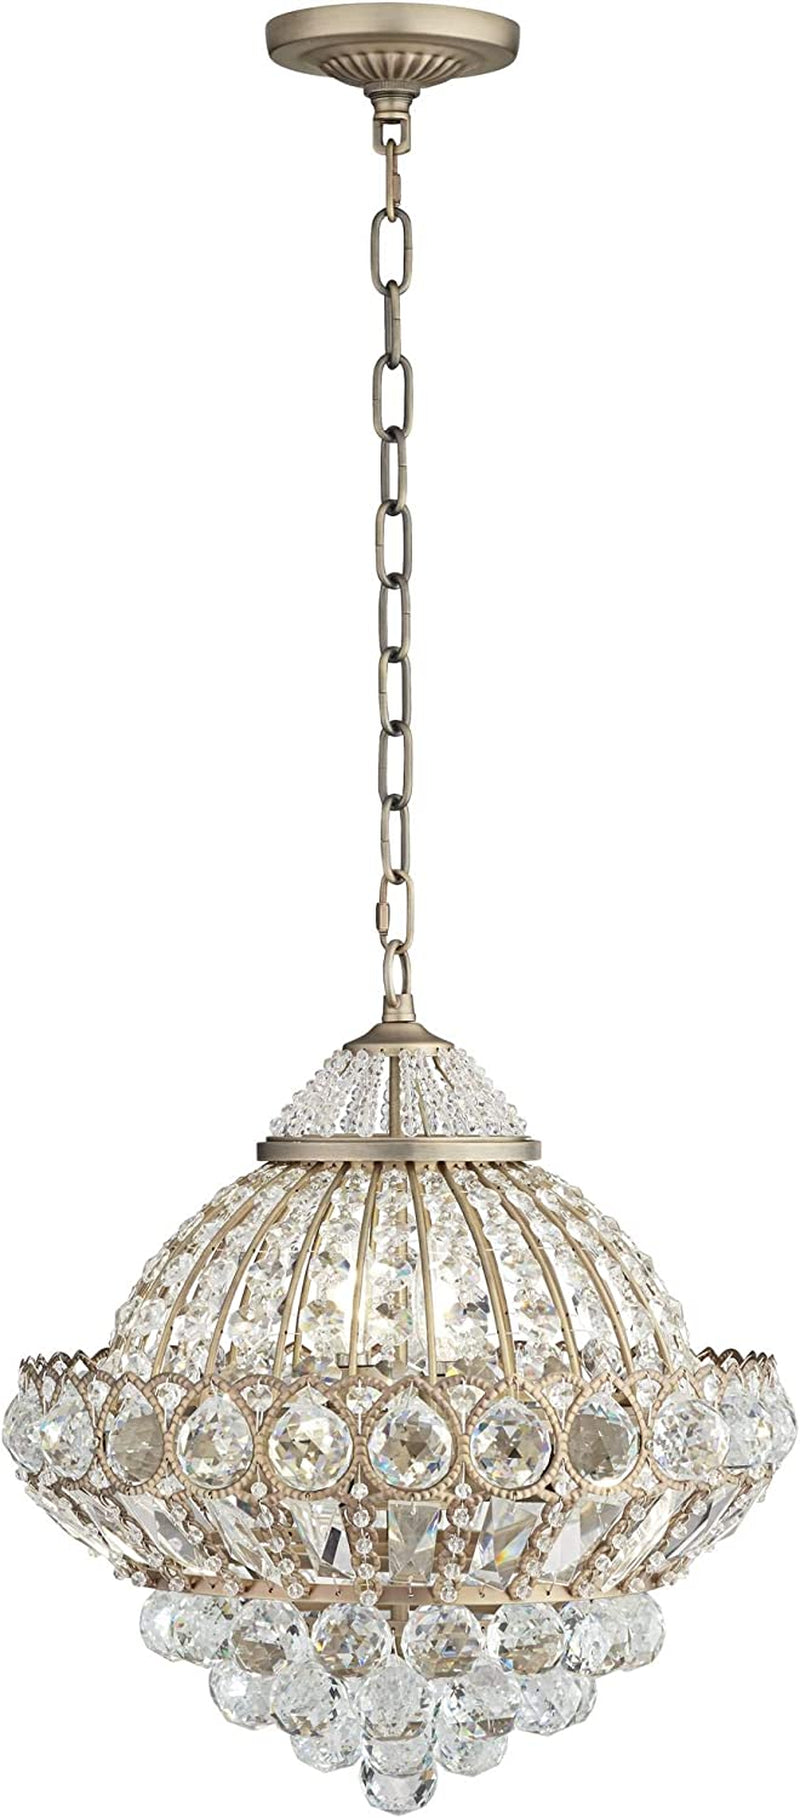 Wallingford Antique Brass Gold Chandelier Lighting 16" Wide Clear Crystal Shade 6-Light Fixture for Dining Room House Foyer Entryway Kitchen Bedroom Living Room High Ceilings - Vienna Full Spectrum